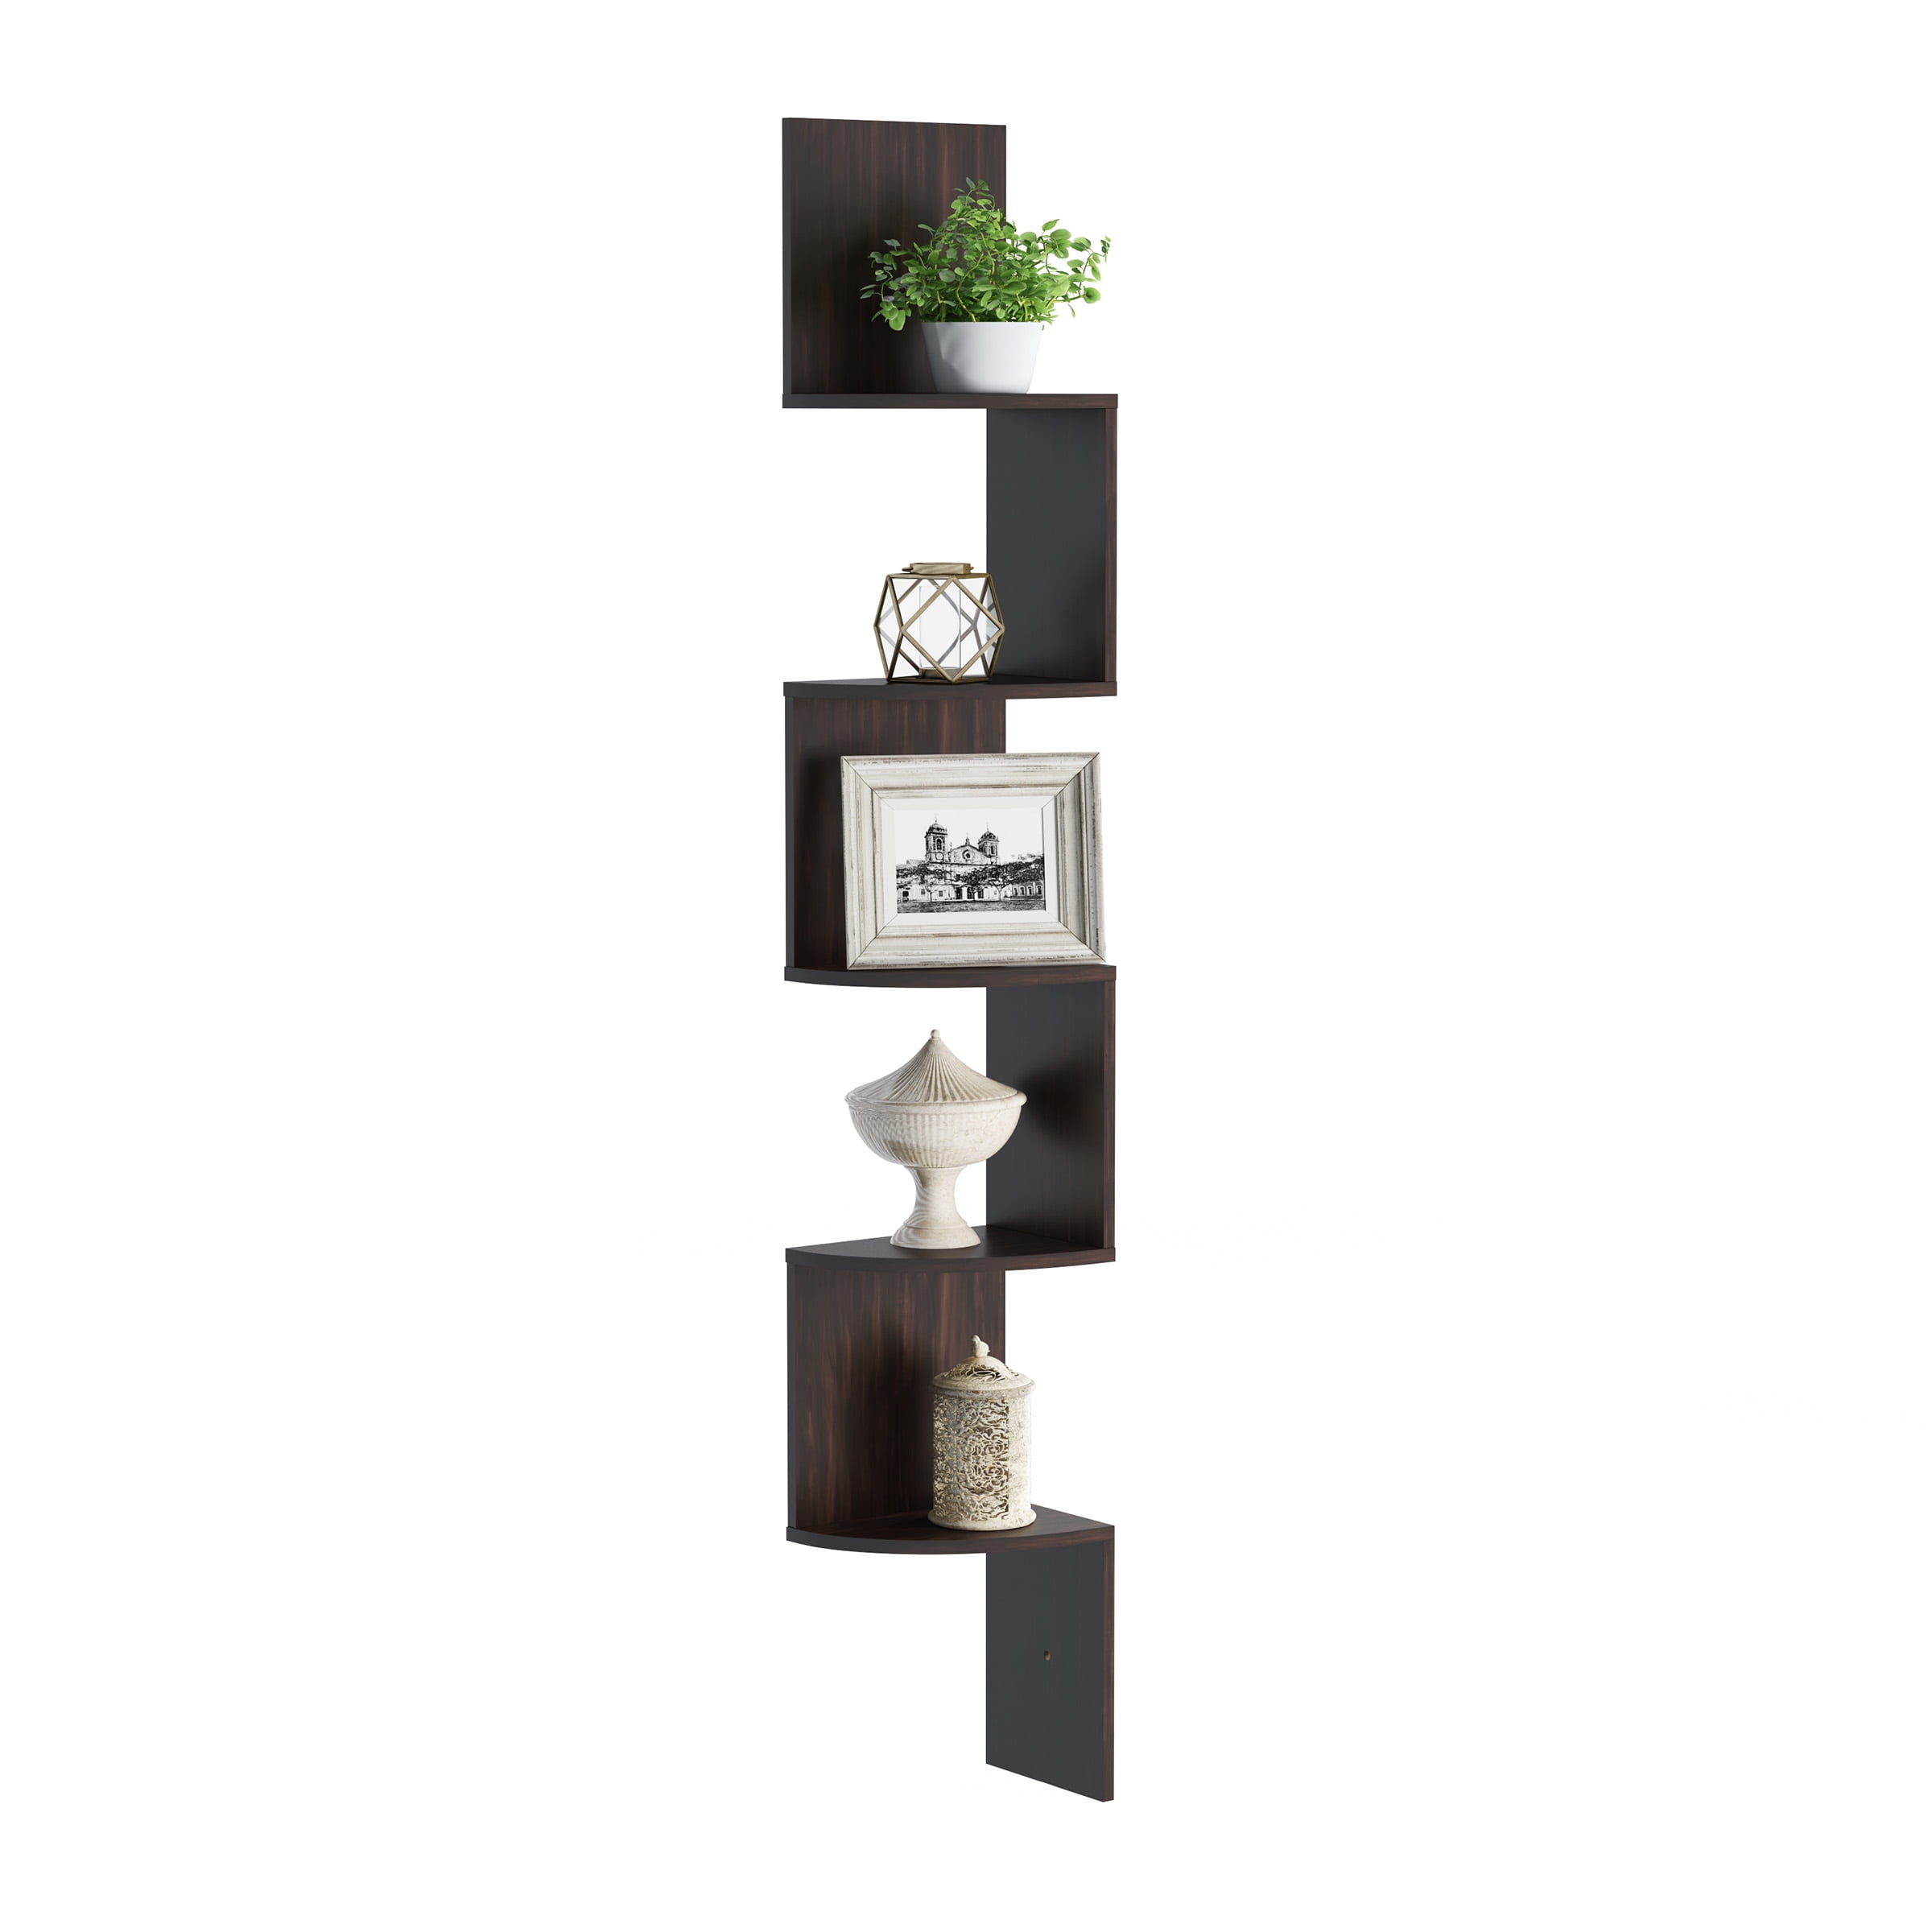 Floating Corner Shelf 5 Tier Wall Shelves With Brackets To Display Decor Books Photos More Hardware Included By Lavish Home Dark Brown Com - Dark Brown Floating Wall Shelves